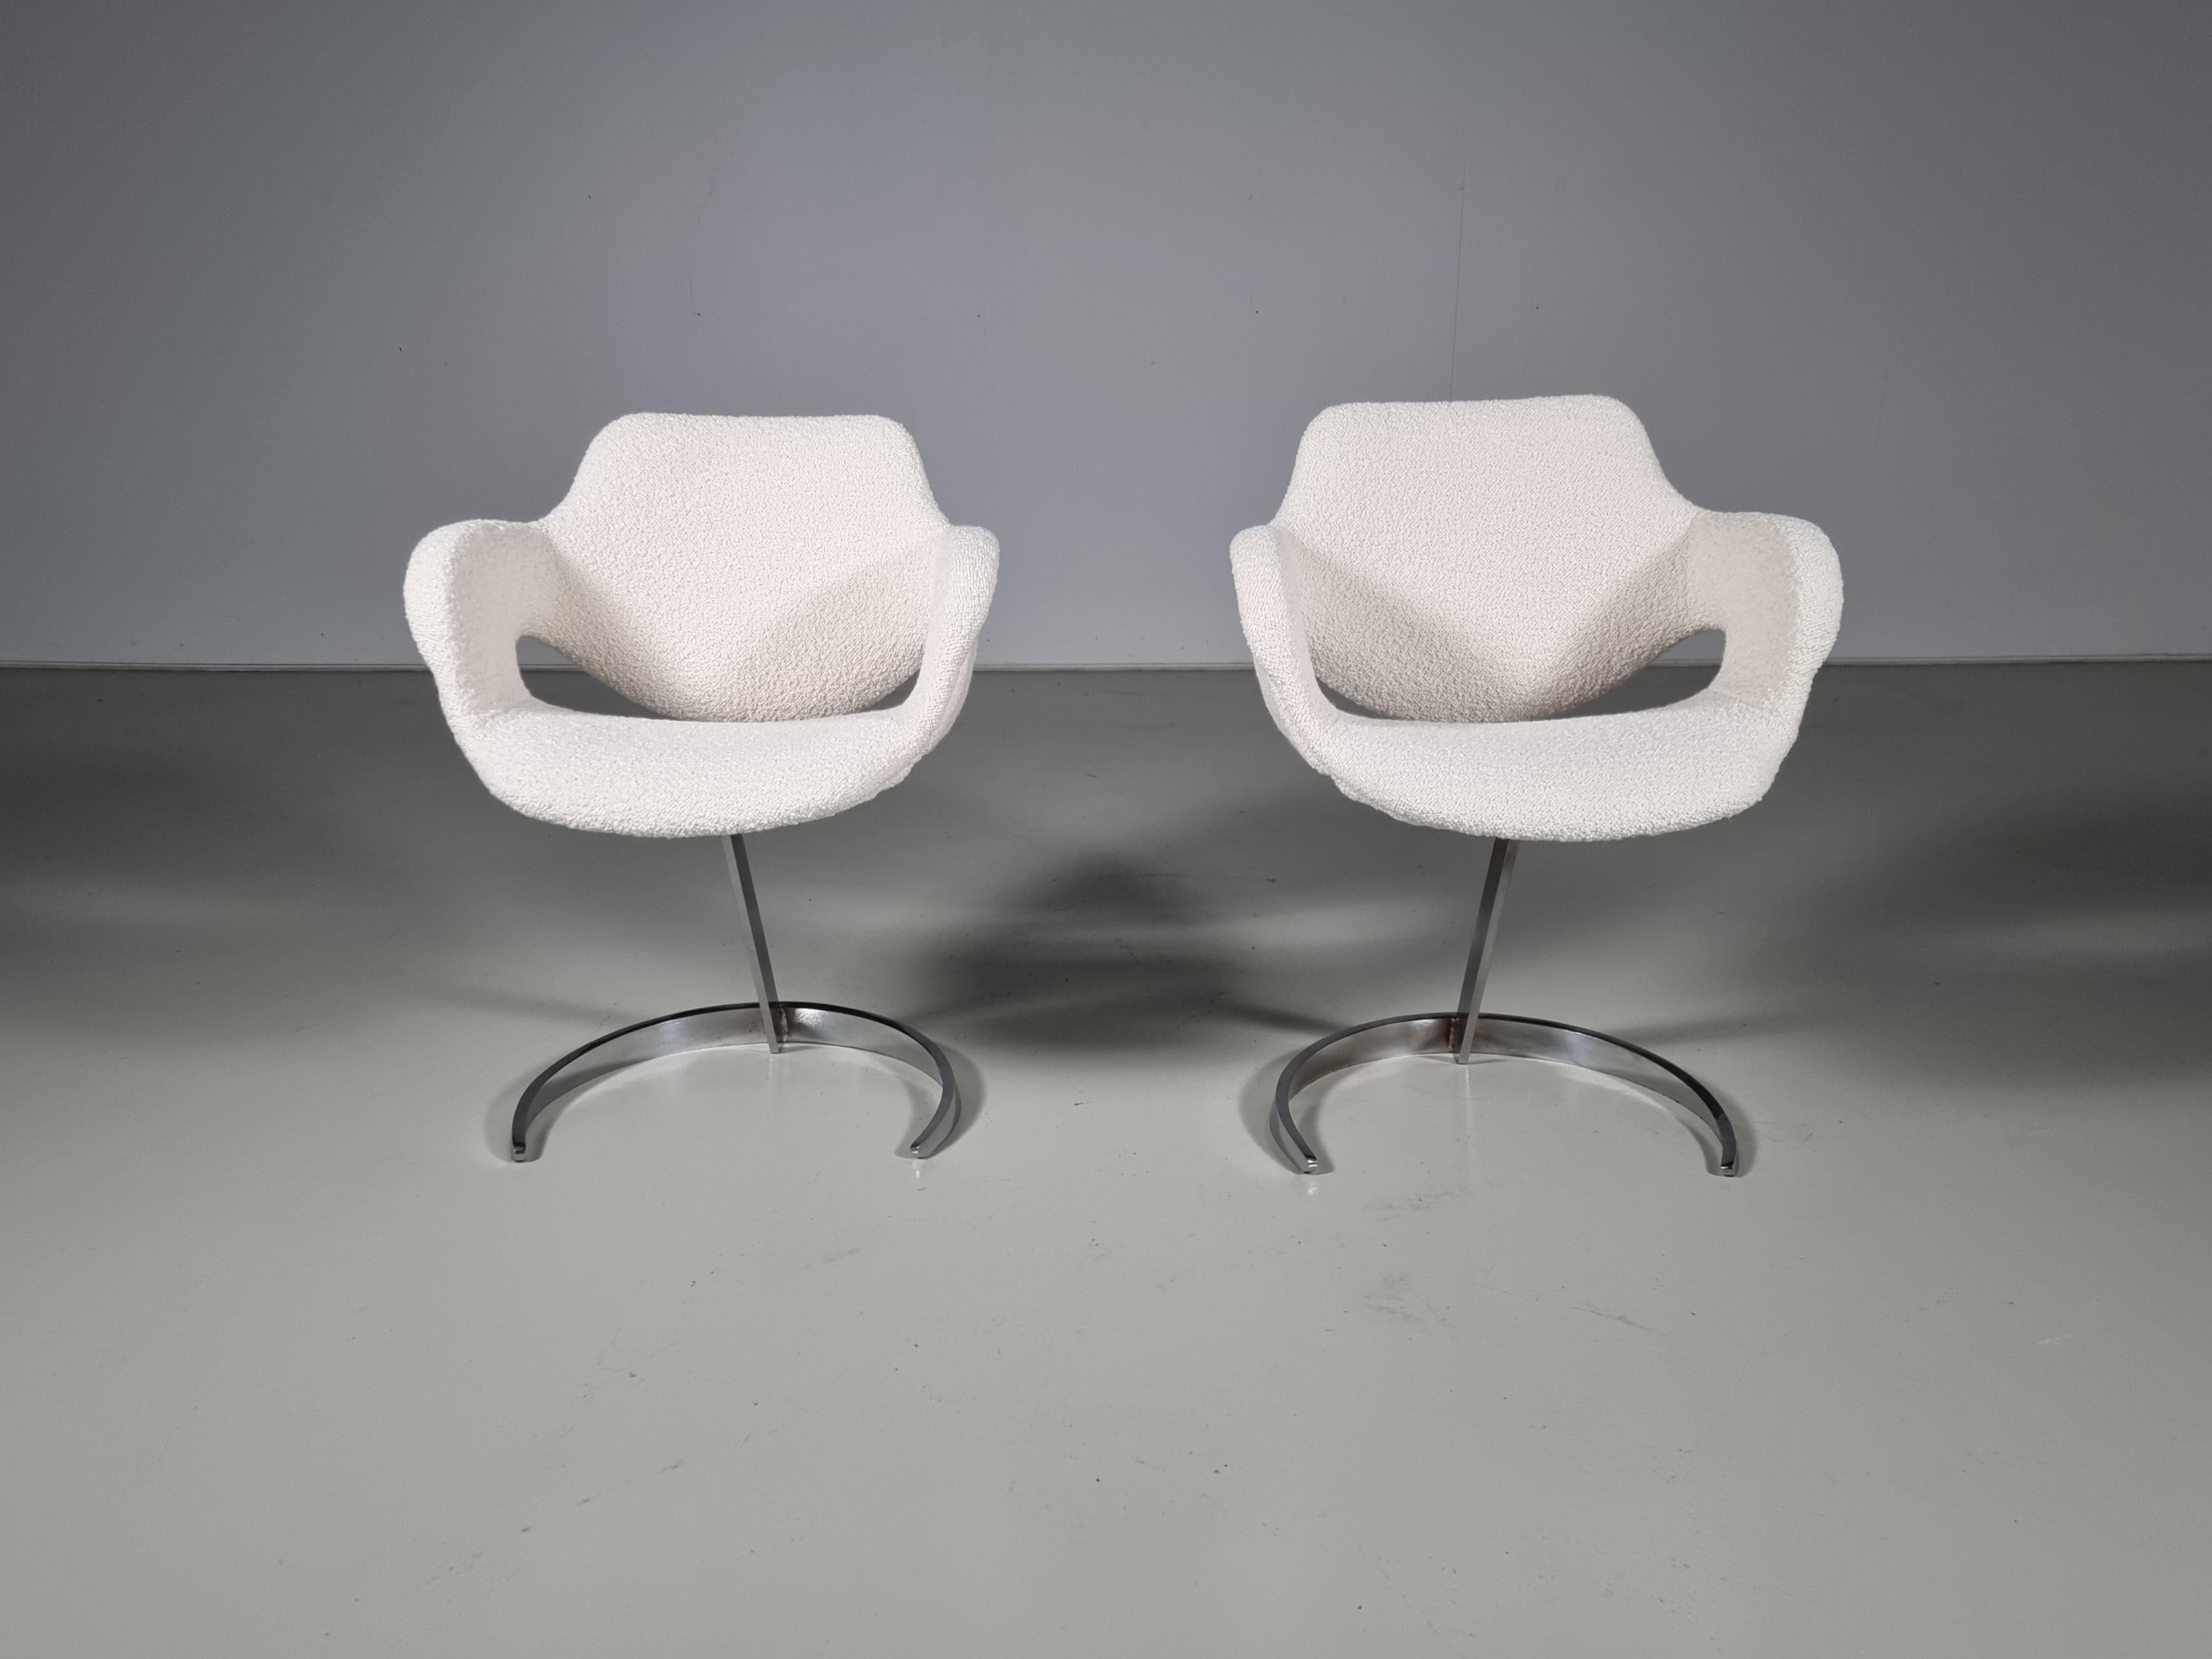 Boris Tabacoff Scimitar chairs for 'Mobilier Modulaire Moderne' (MMM), France, 1960s.

Boris Tabacoff is well known for his futuristic-looking pieces during the 1960s. These 'Scimitar